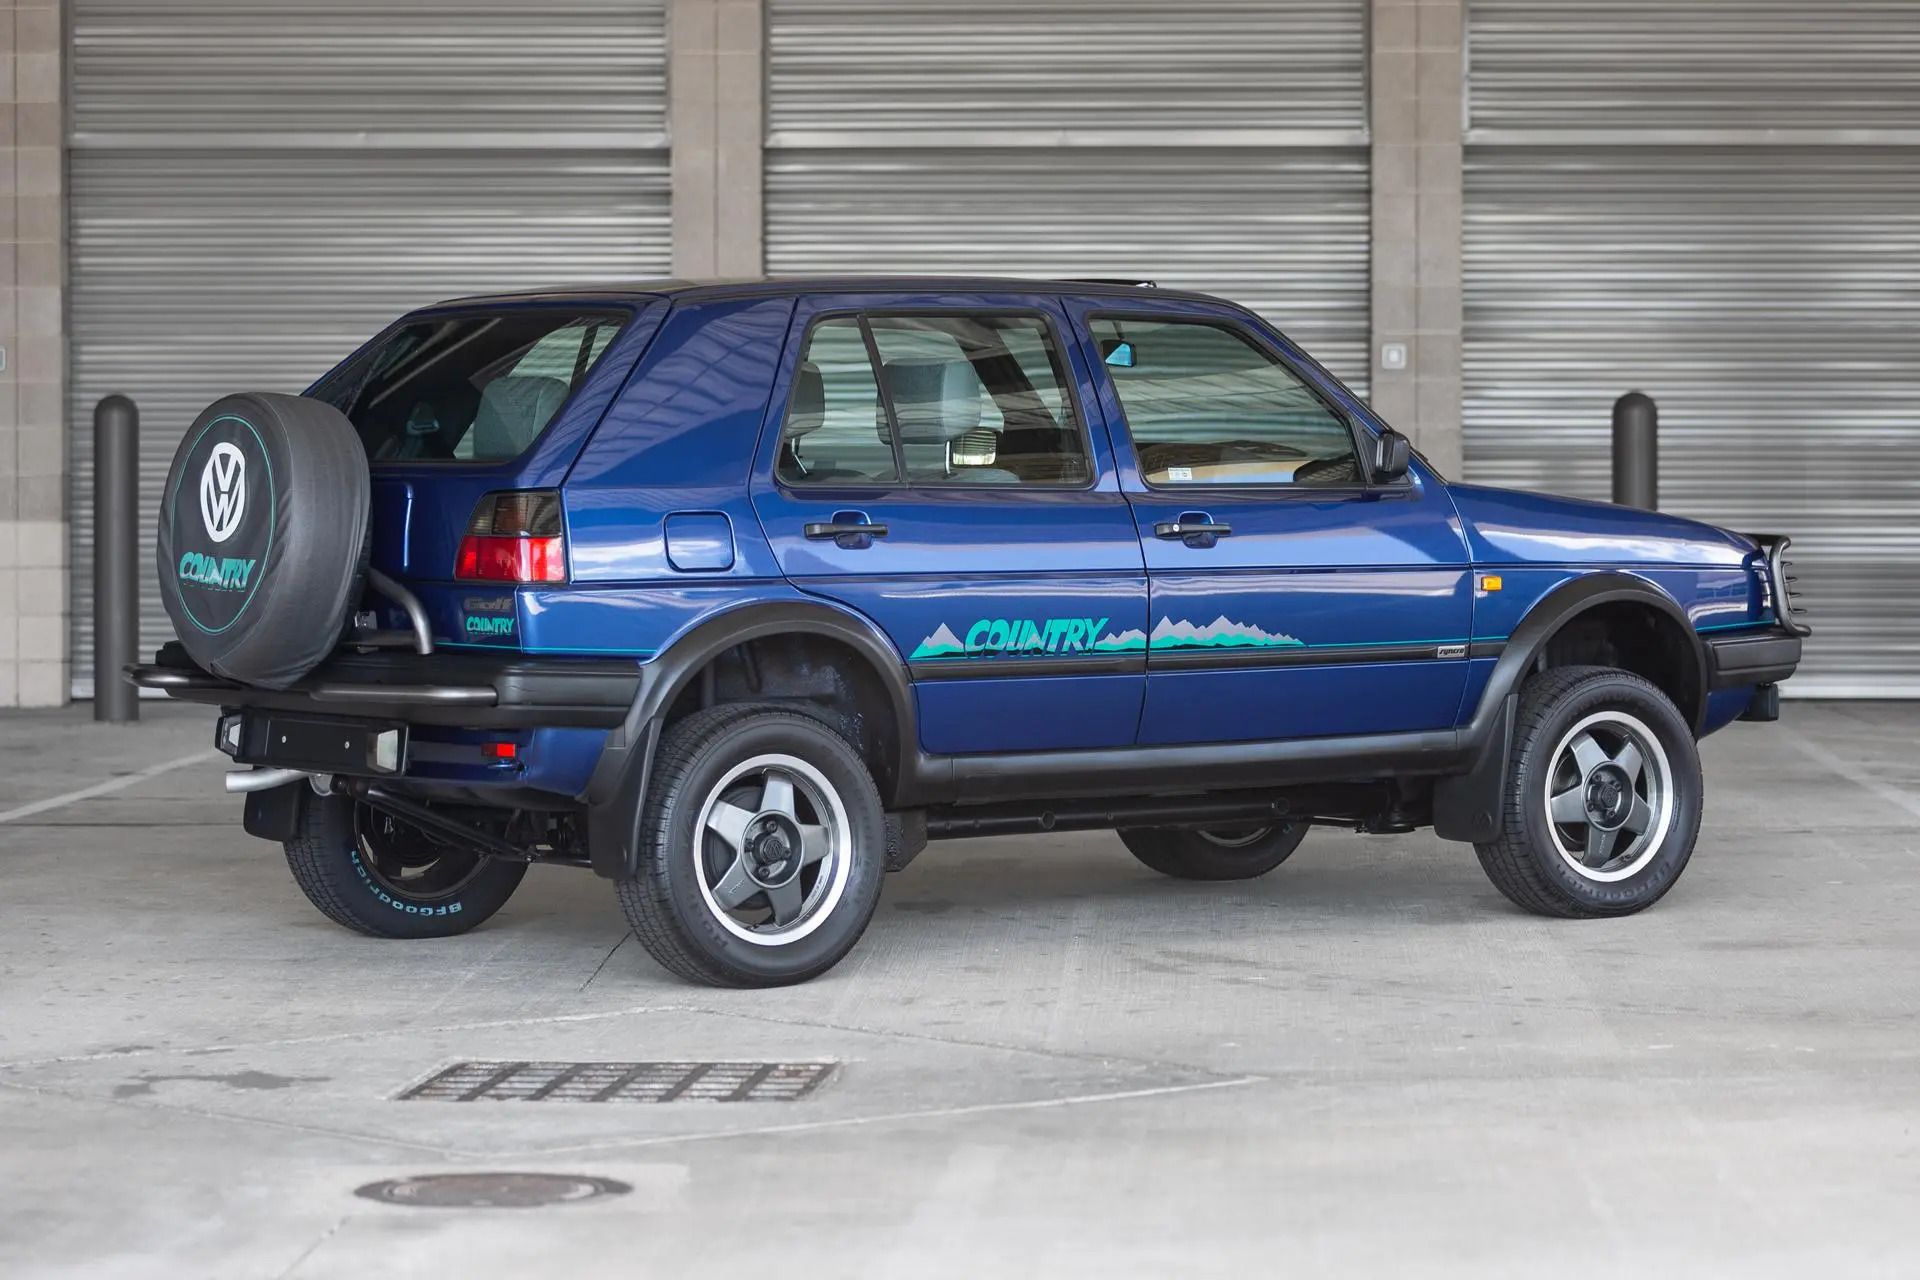 Ford Bronco Rivian shocks with R2, R3, R3X reveals! $45K starting price, 0-60 under 3 secs, 300+ miles range, NACS port 1992-volkswagen-golf-country-4x4-5-speed-exterior-8-2-34867-653bc95e6c4d2